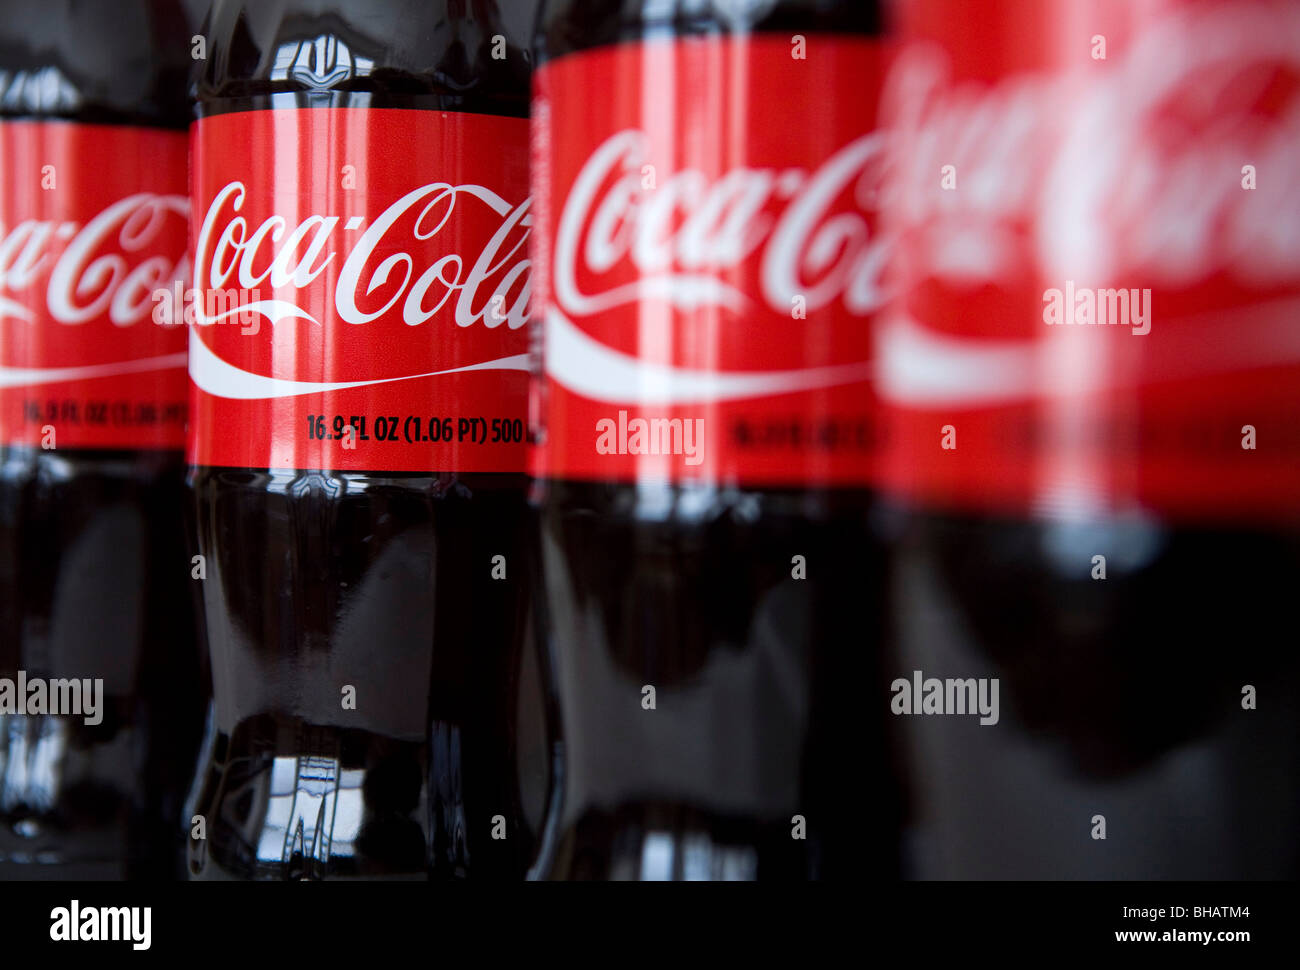 A grouping of Coca-Cola bottles.  Stock Photo